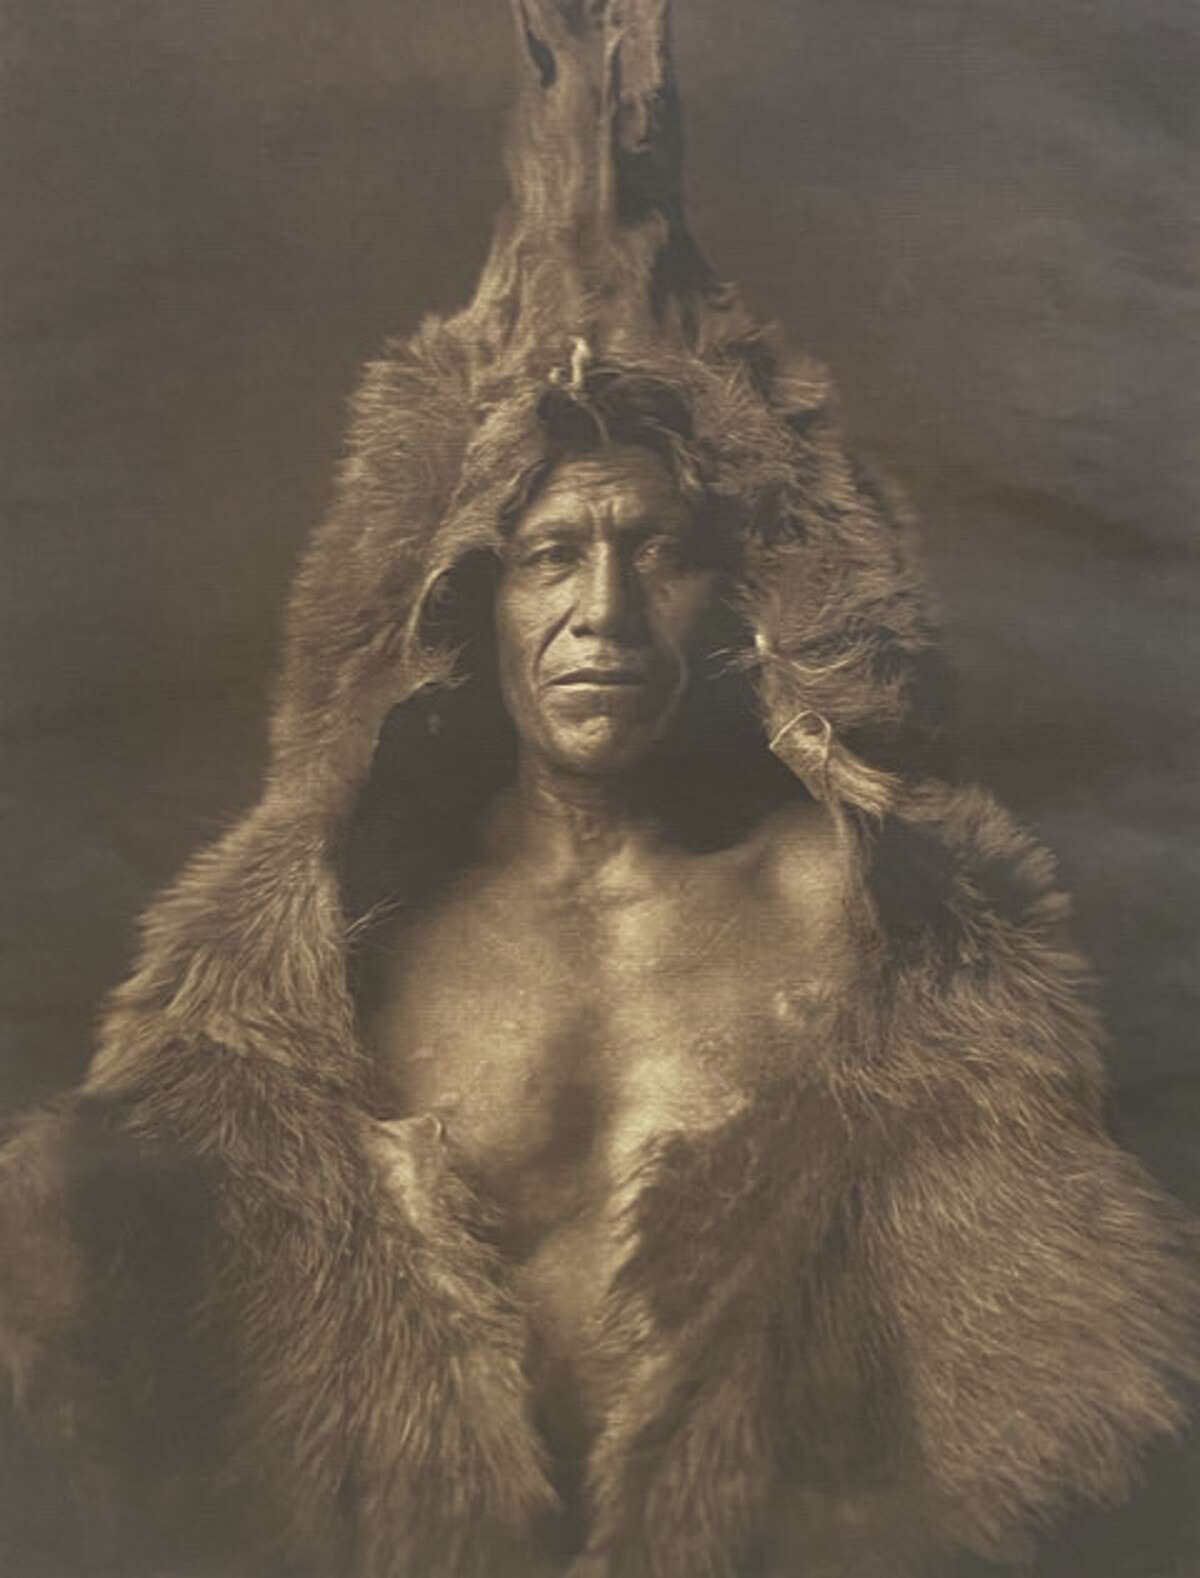 "The Shadow Catcher: Edward Sheriff Curtis and The North American Indian" will have an opening reception from 6 to 8 p.m. Feb. 24 at Baker Schorr Fine Art located at 200 Spring Park Drive Suite 105